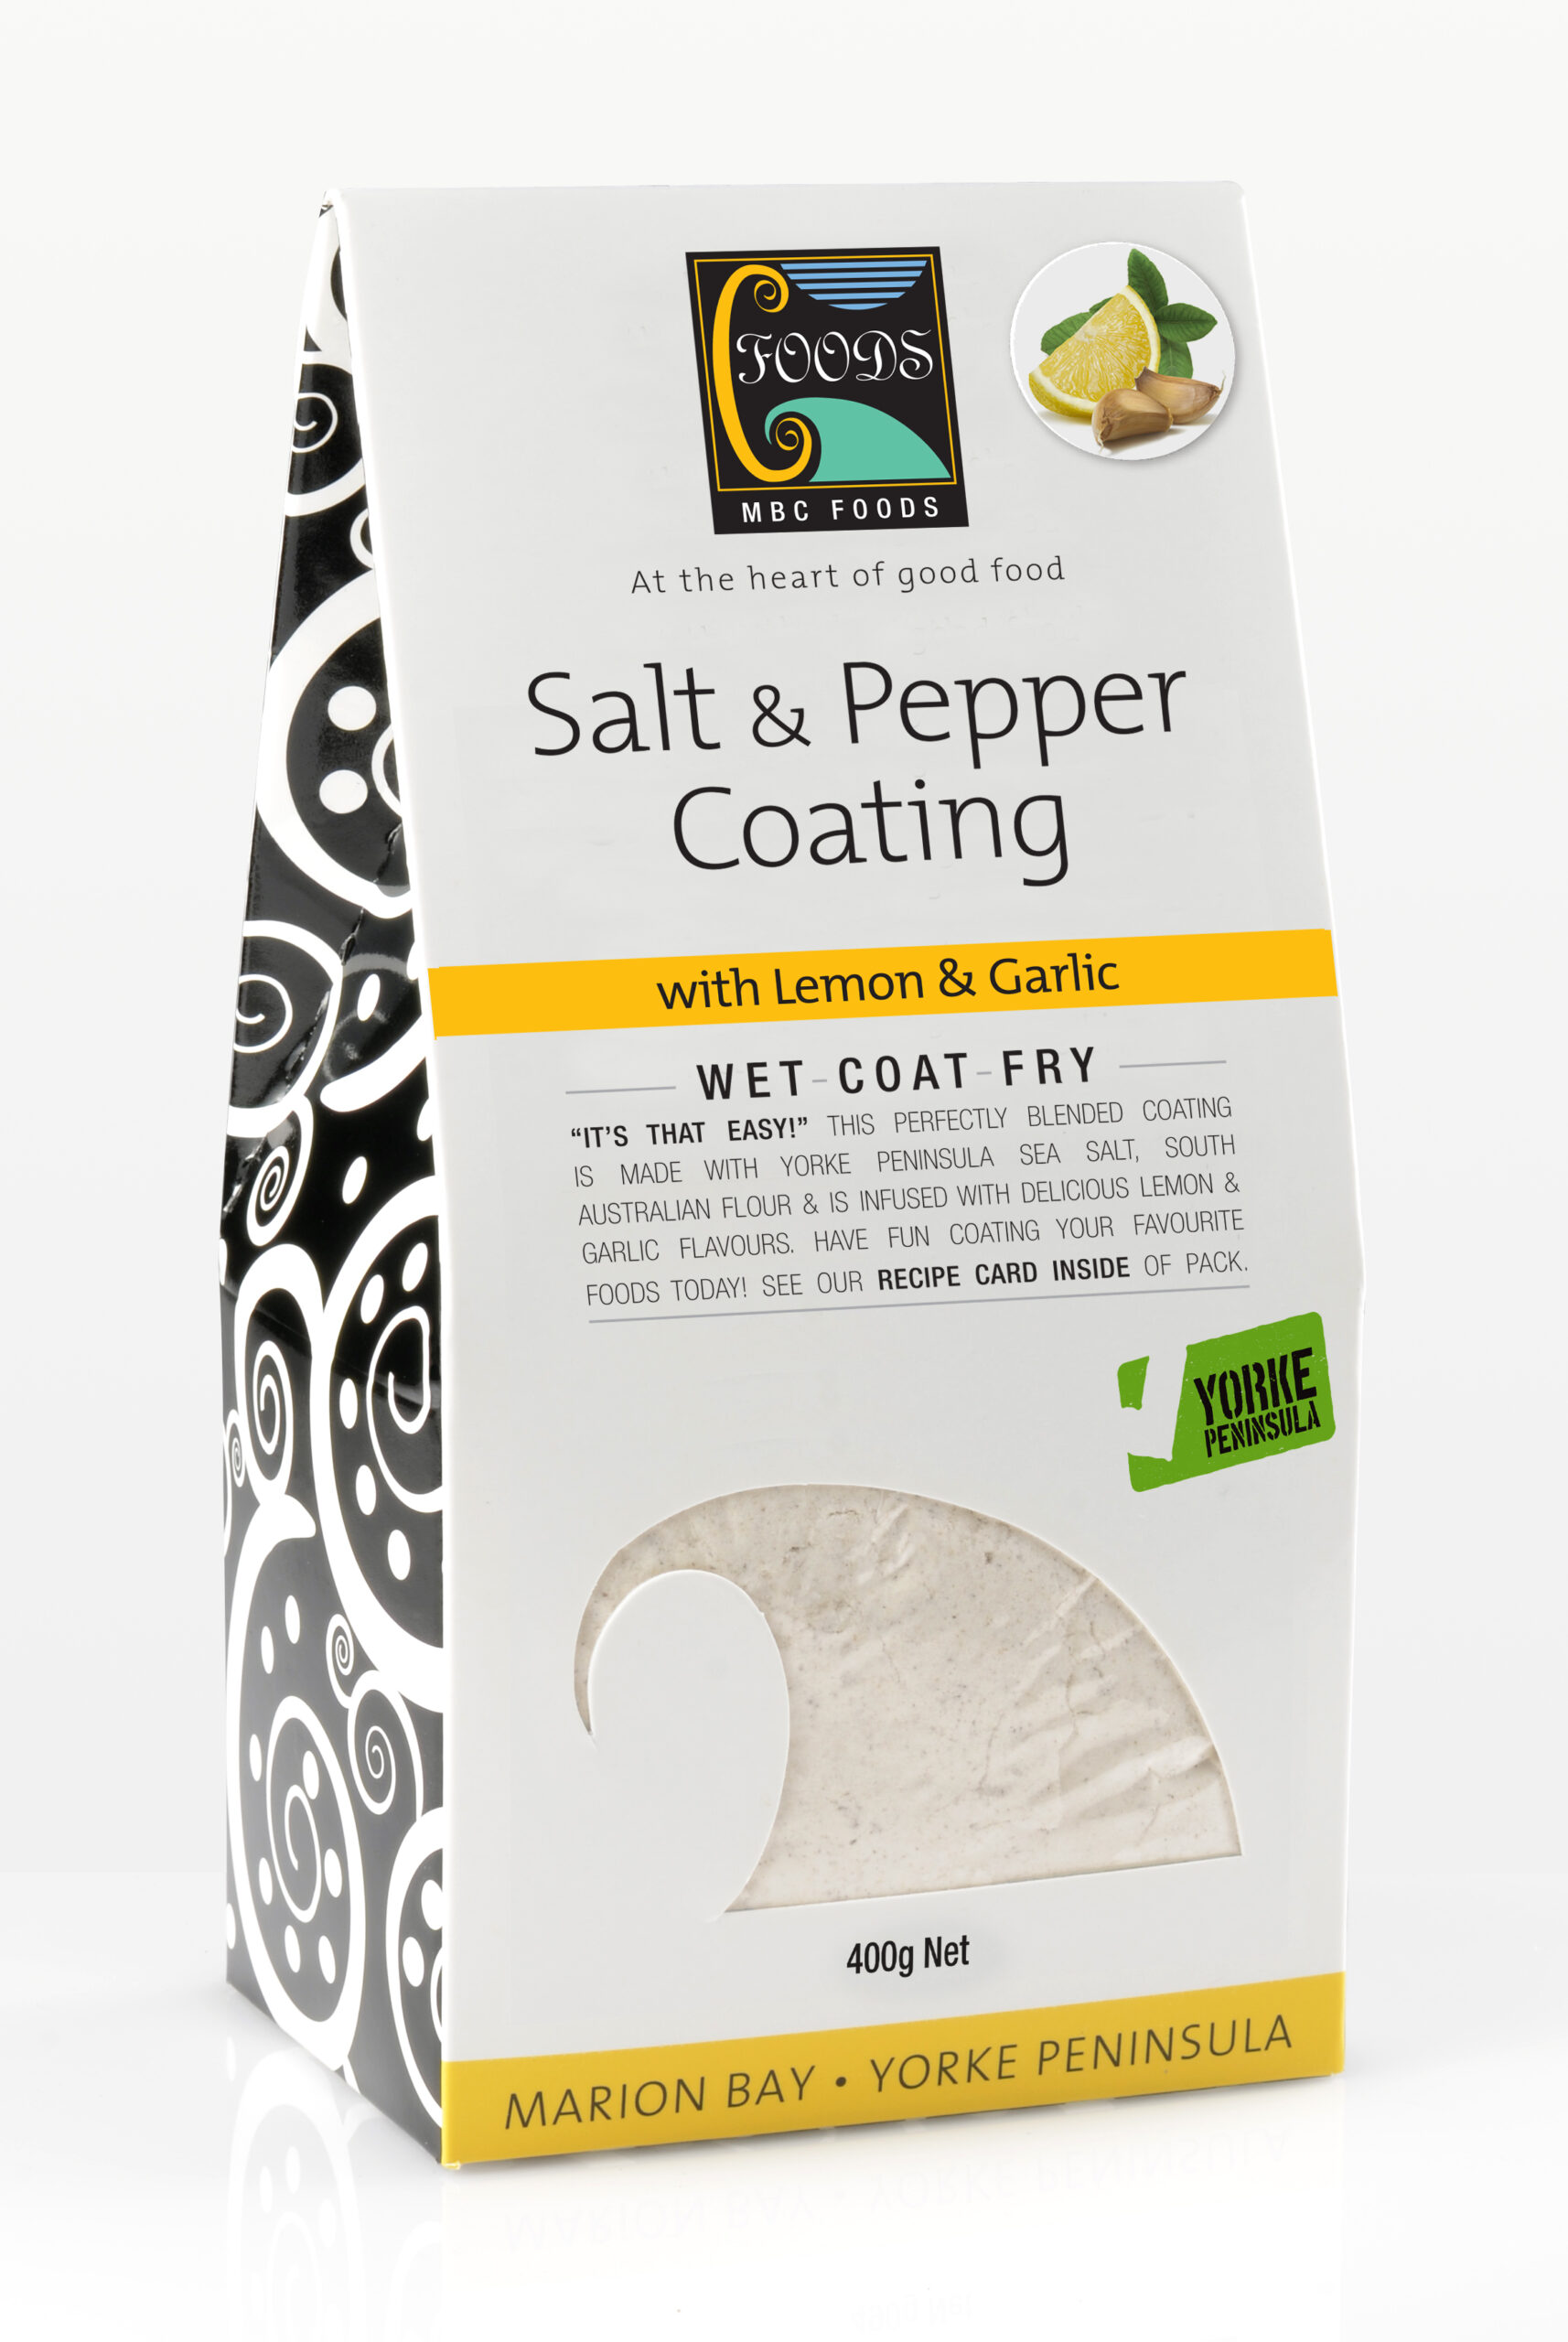 Packet of MBC Foods Salt & Pepper Coating with Lemon & Garlic viewed on angle.